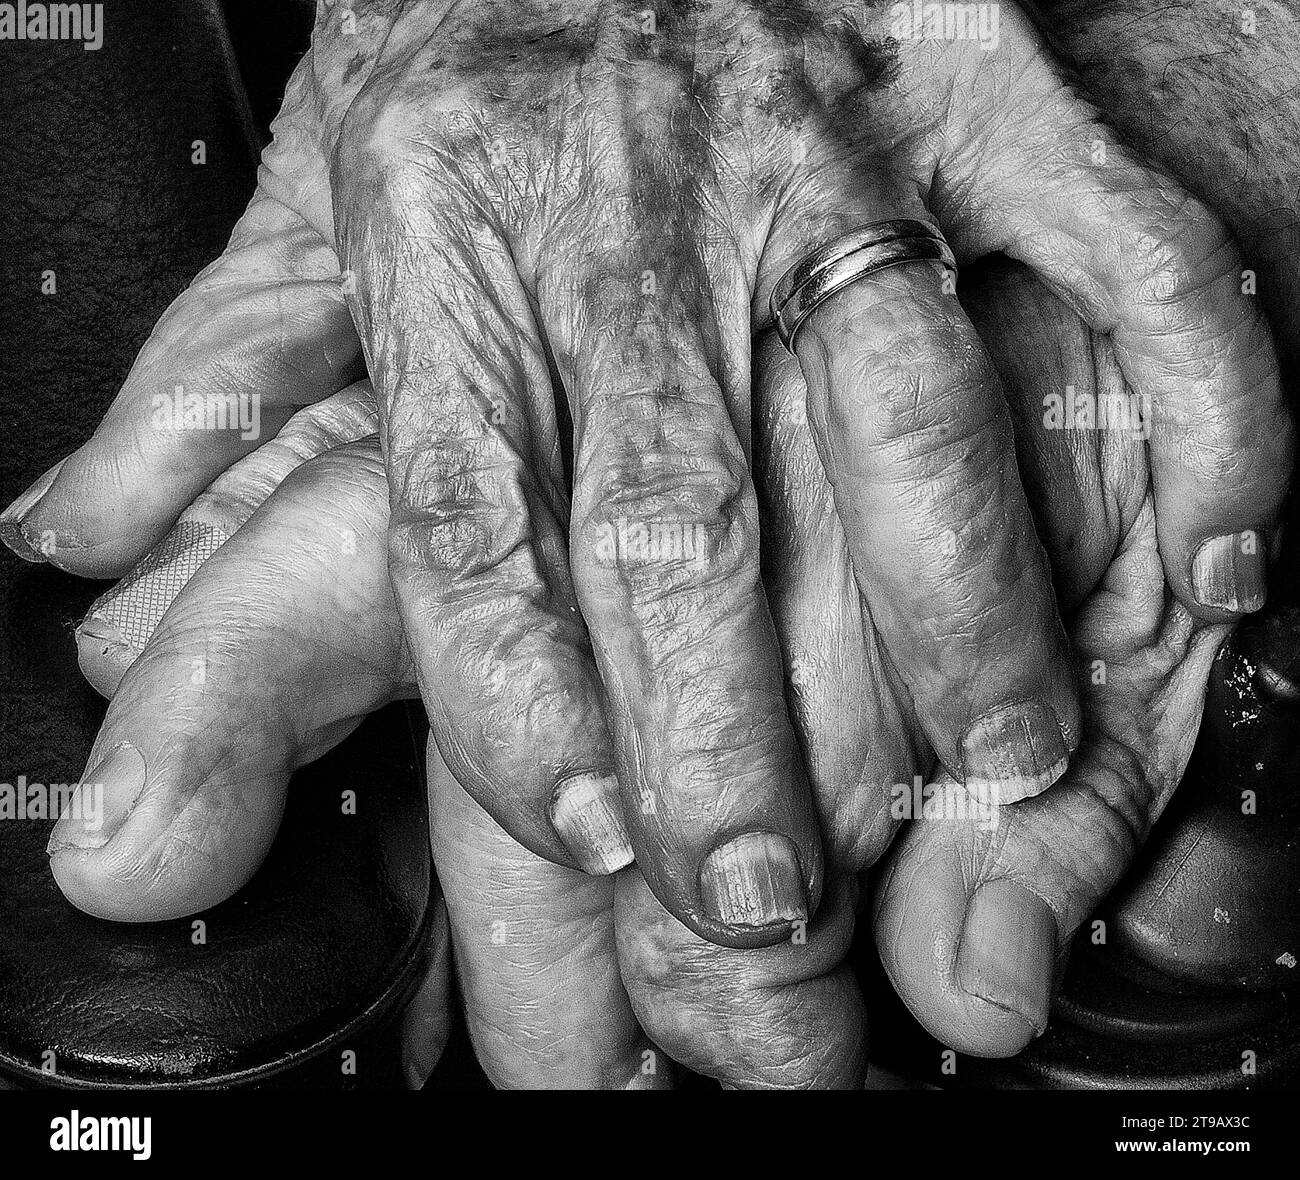 Elderly husband & wife's hands together. Stock Photo